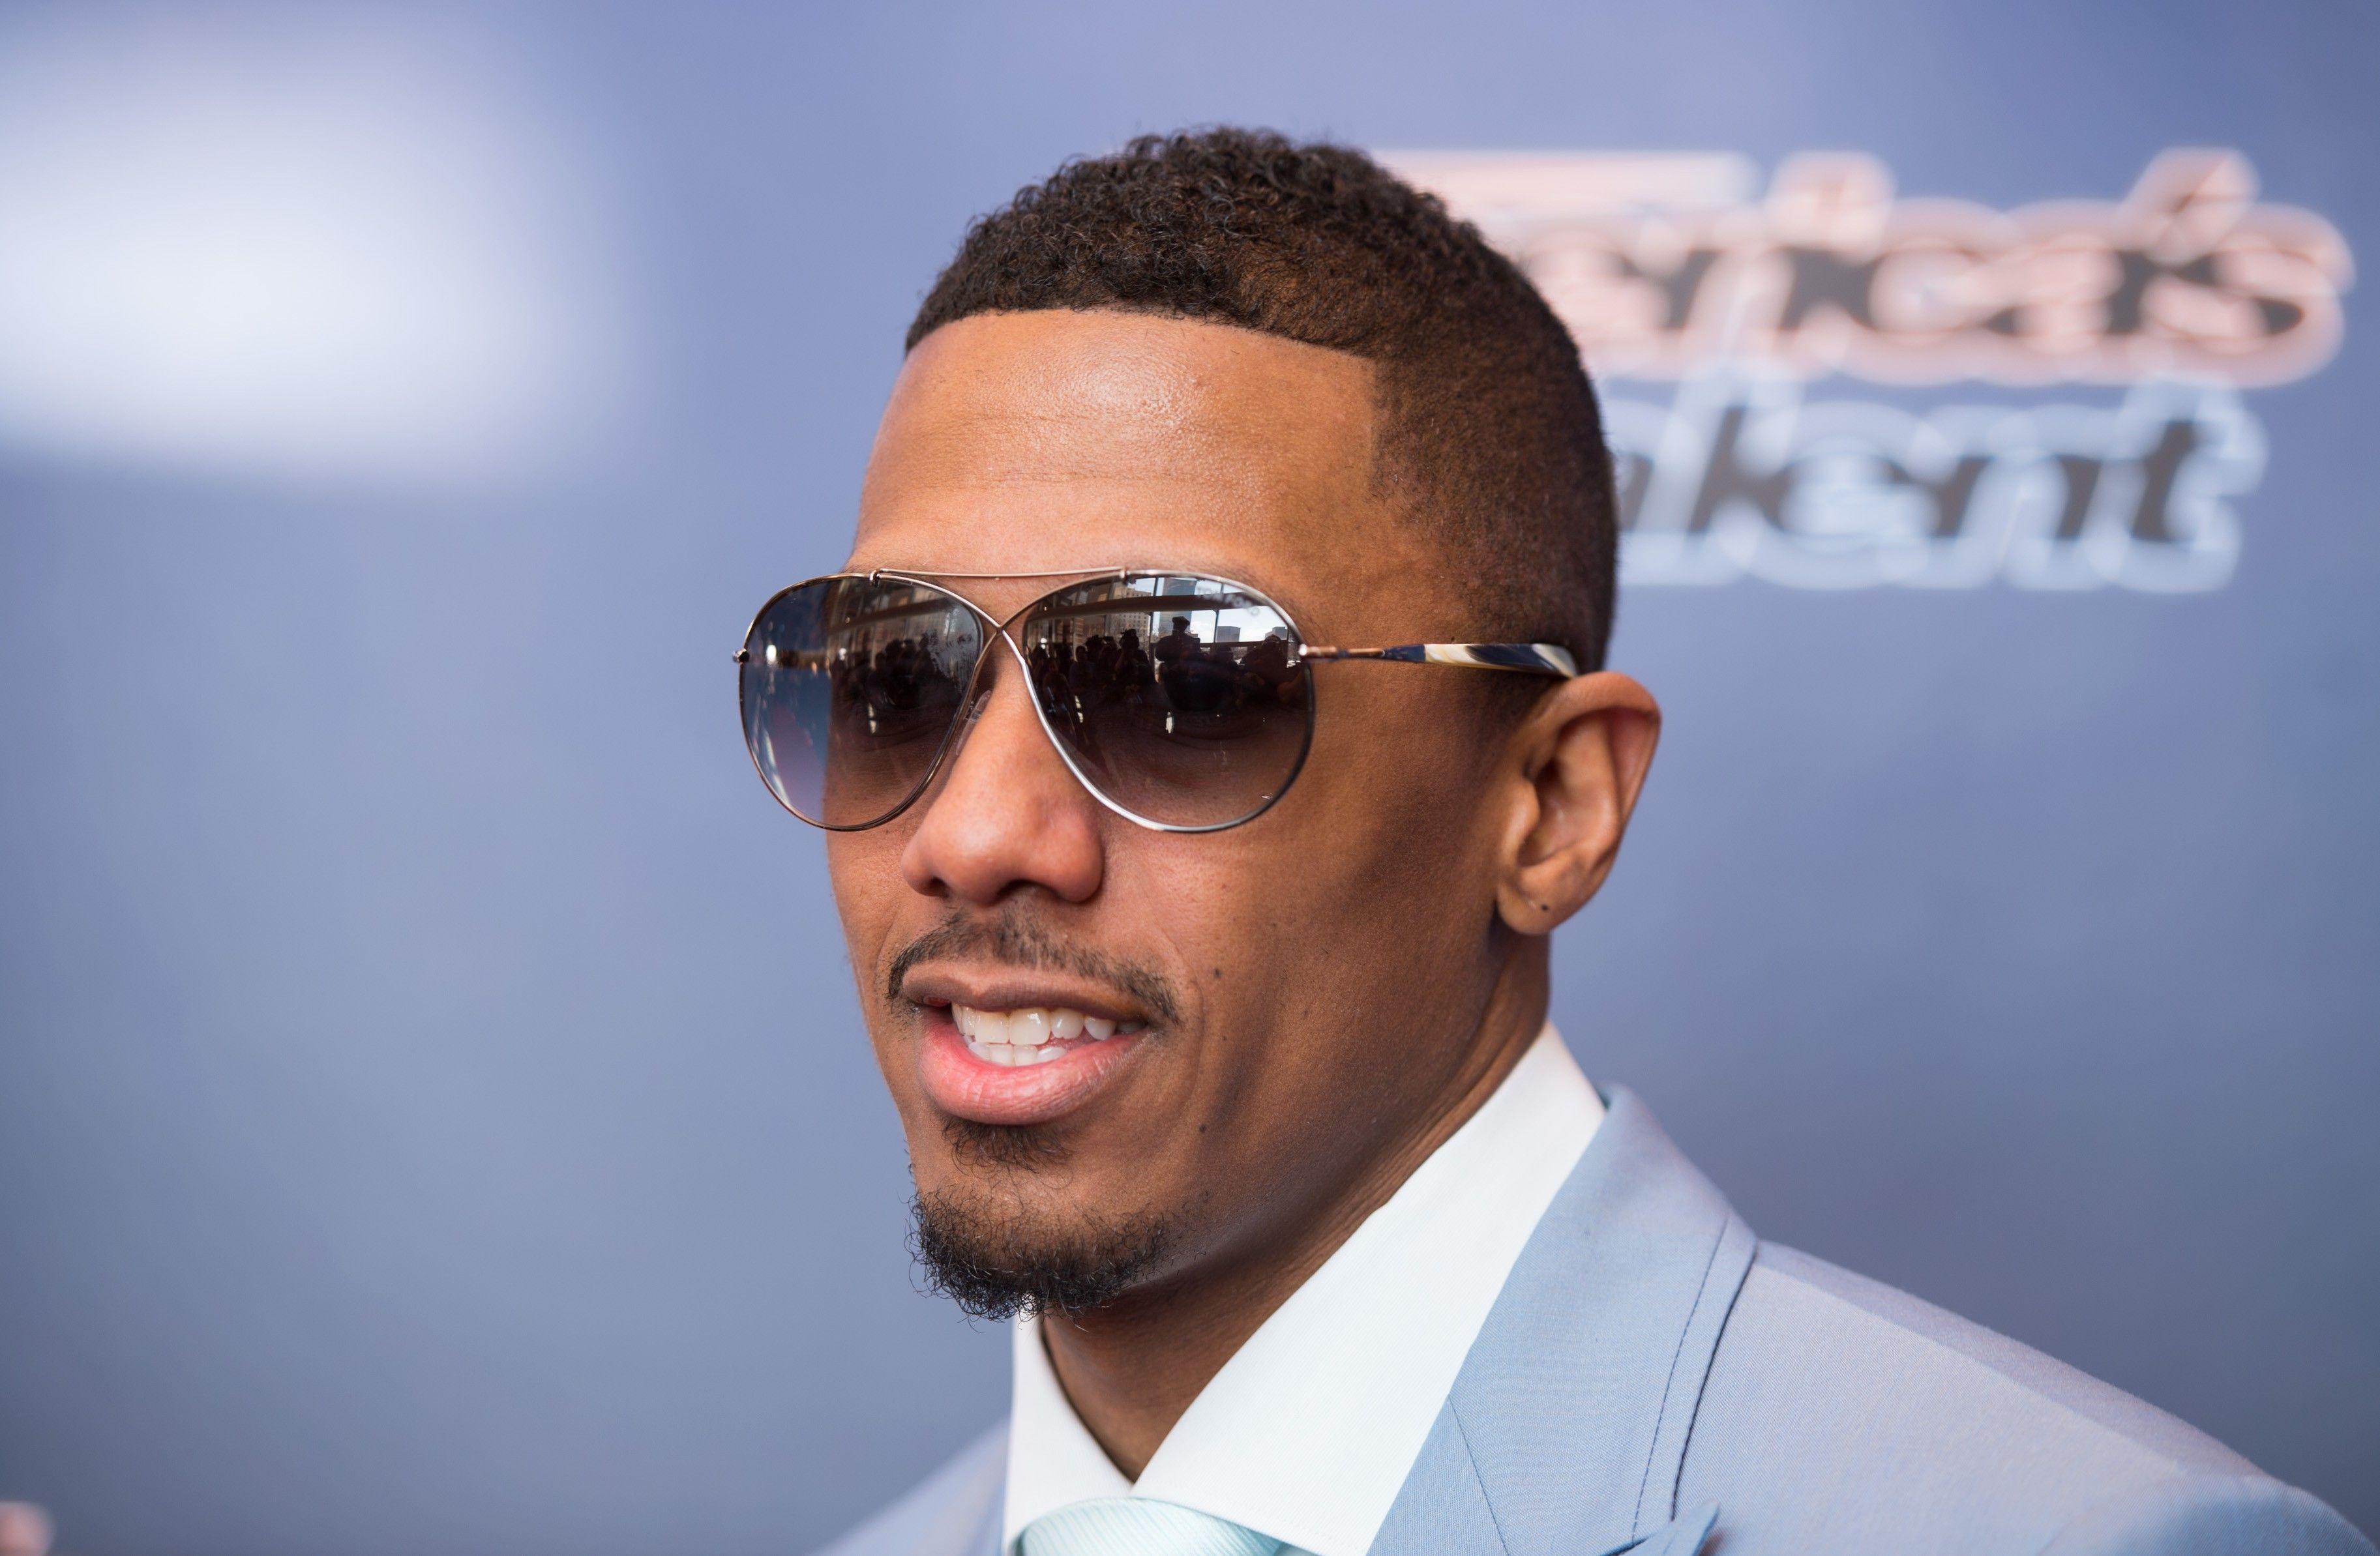 Nick Cannon Wallpaper Background HD 59676 3650x2387px